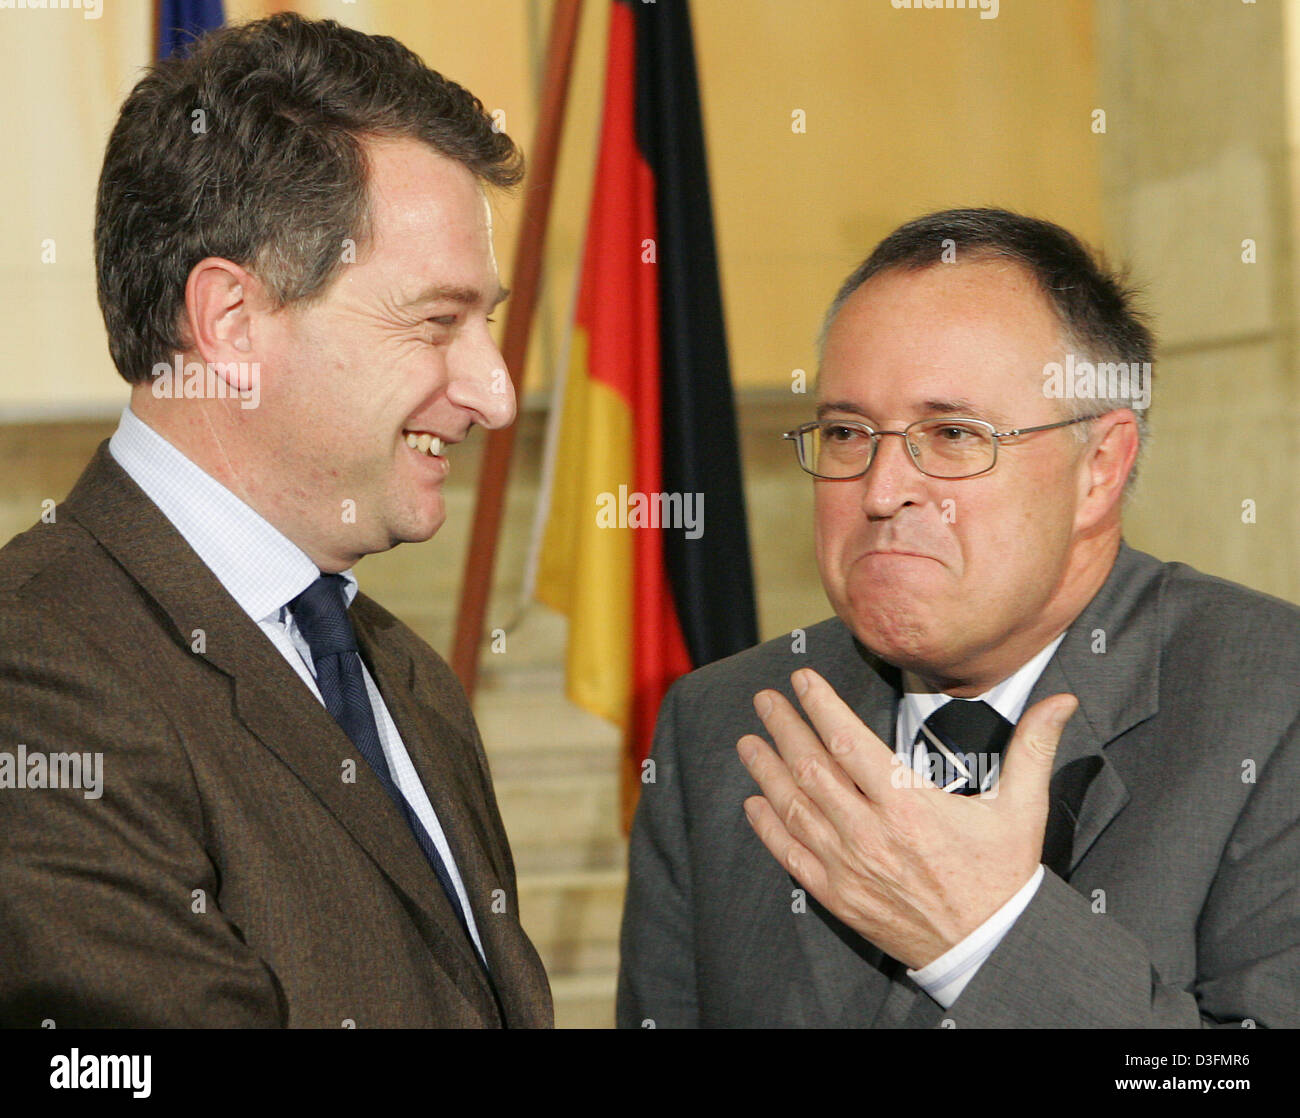 (dpa) - German Finance Minister Hans Eichel (R) receives his French counterpart, newly appointed French Economy and Finance Minister Herve Gaymard (L) at the ministry for finance in Berlin, Germany, 2 December 2004. Gaymard, who has been in office since 29 November 2004, aims to ease the relationships with Germany which has become a bit tense under the helm of his predecessor Sarko Stock Photo